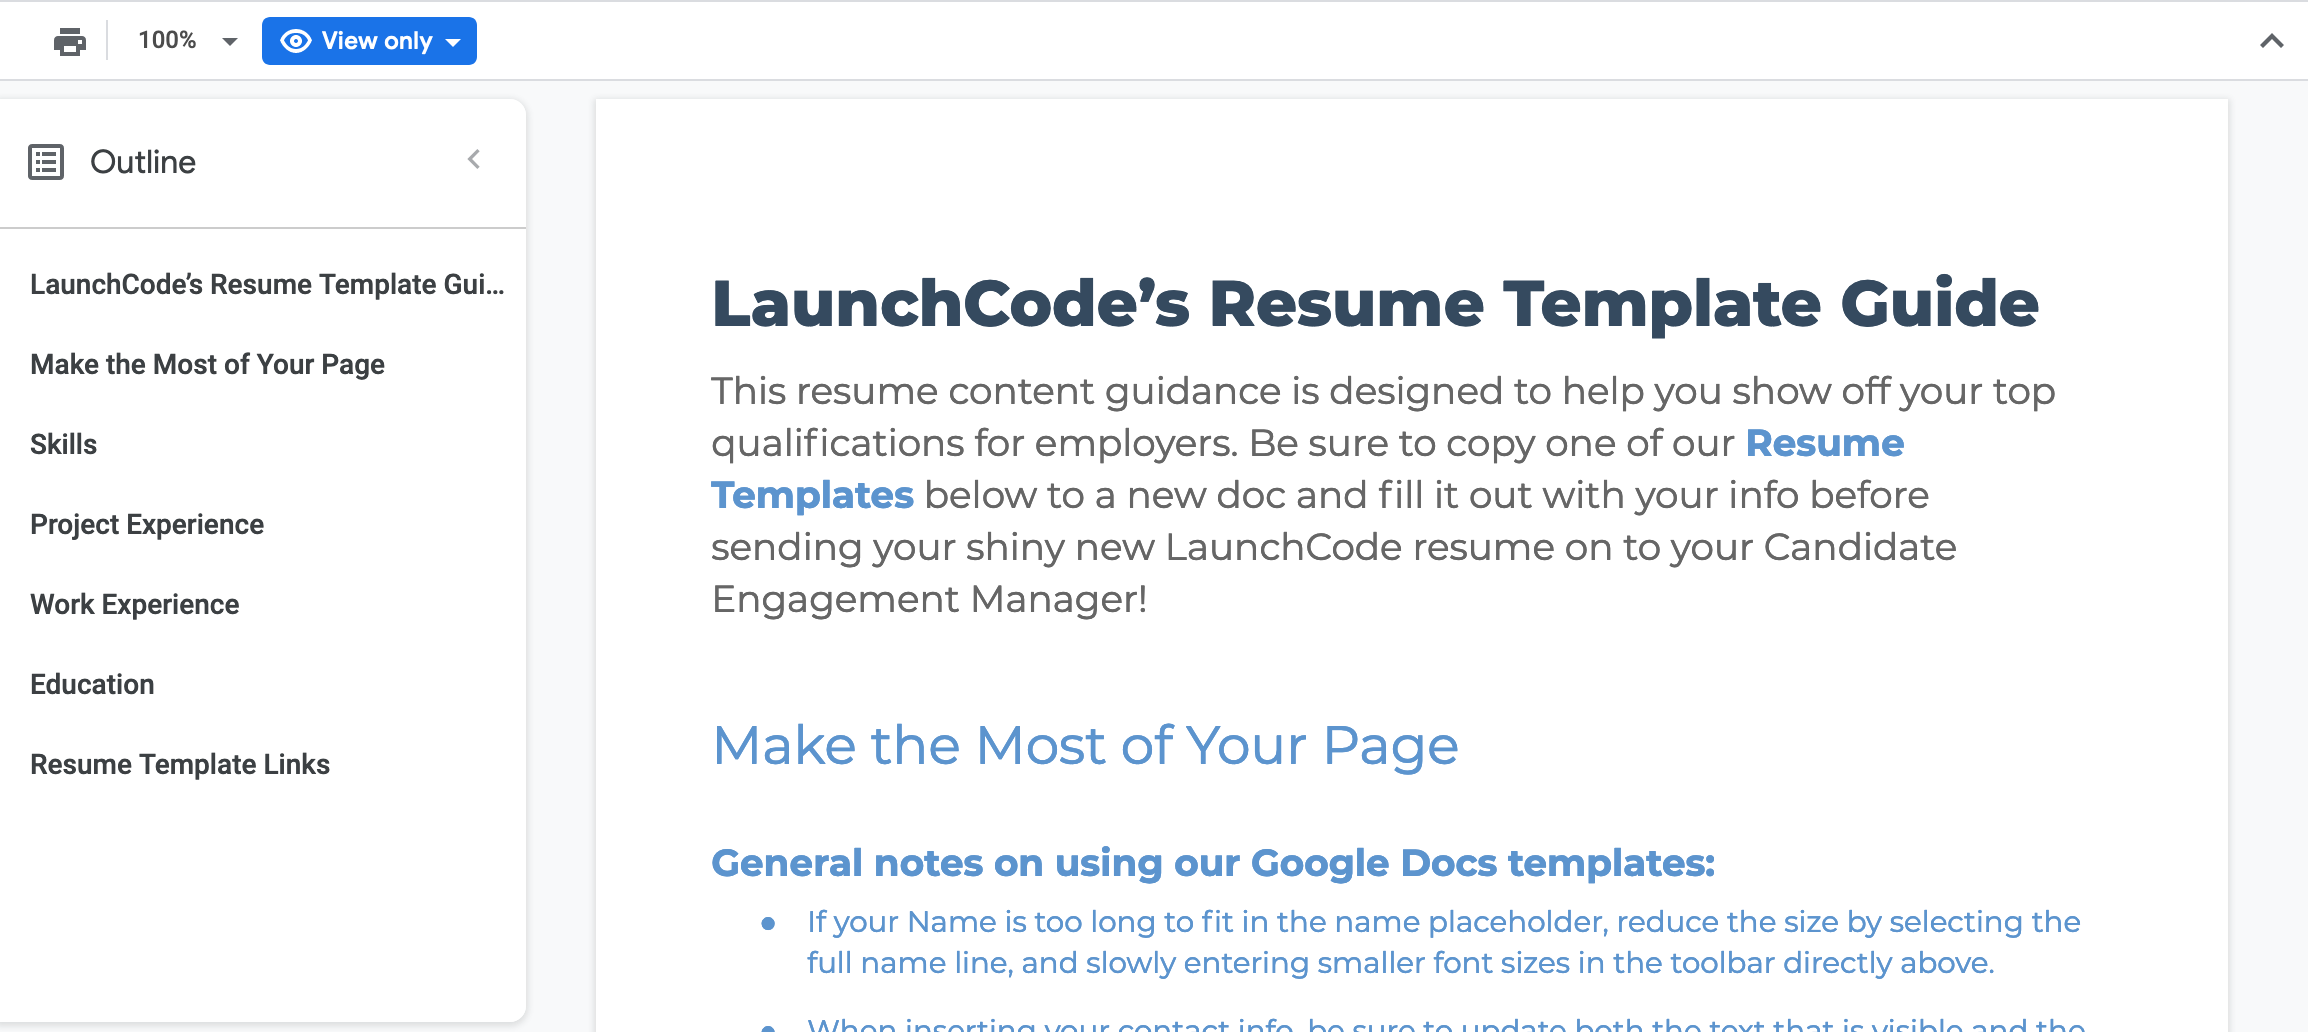 ../../_images/resume-guide.png